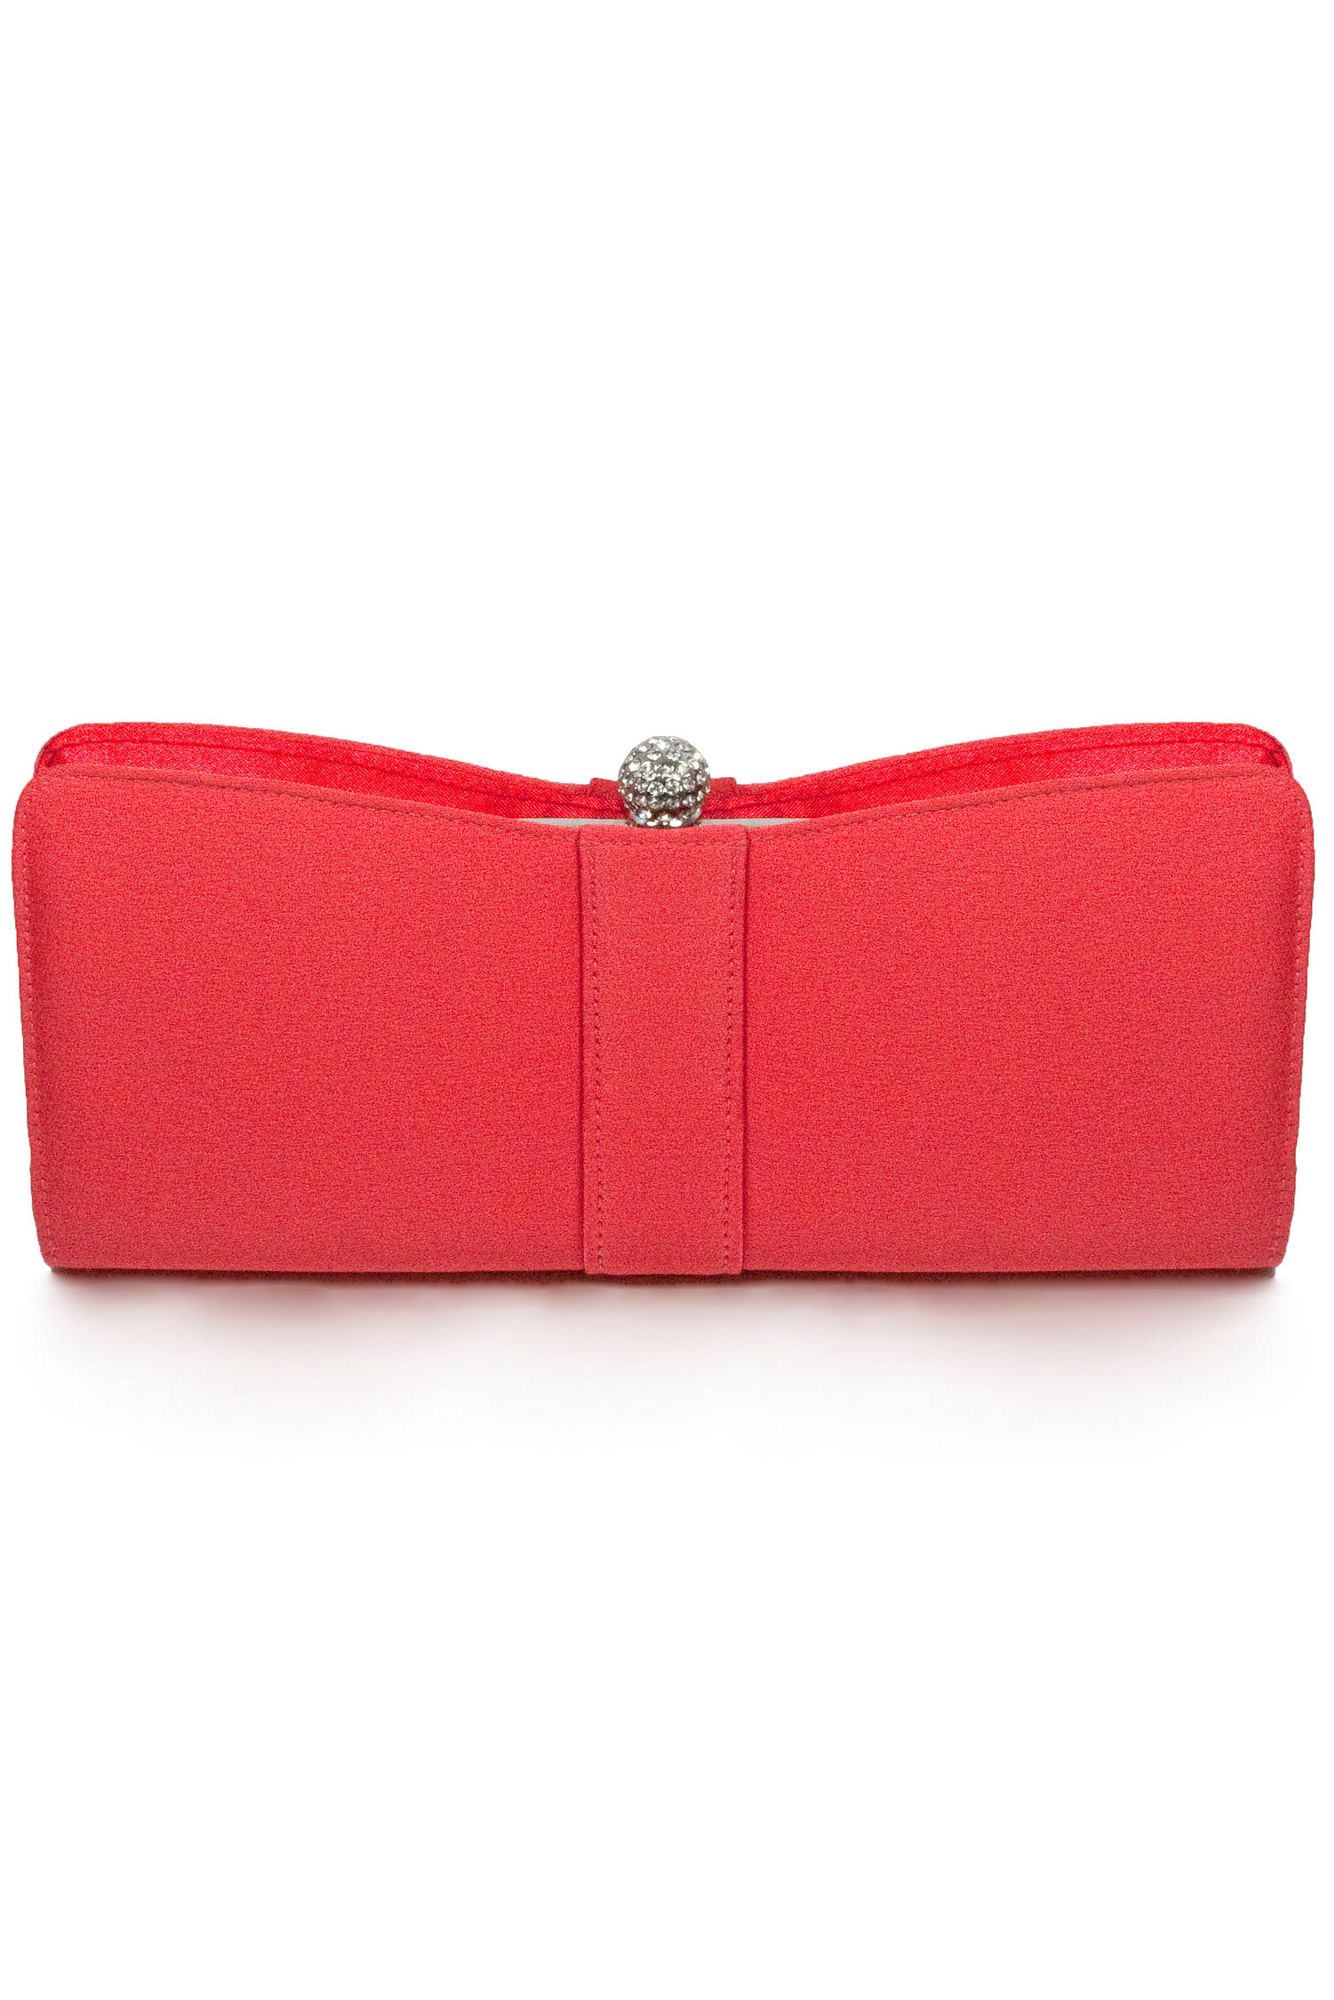 Ann Harvey Coral Satin Feel Clutch Bag in Red (coral) | Lyst